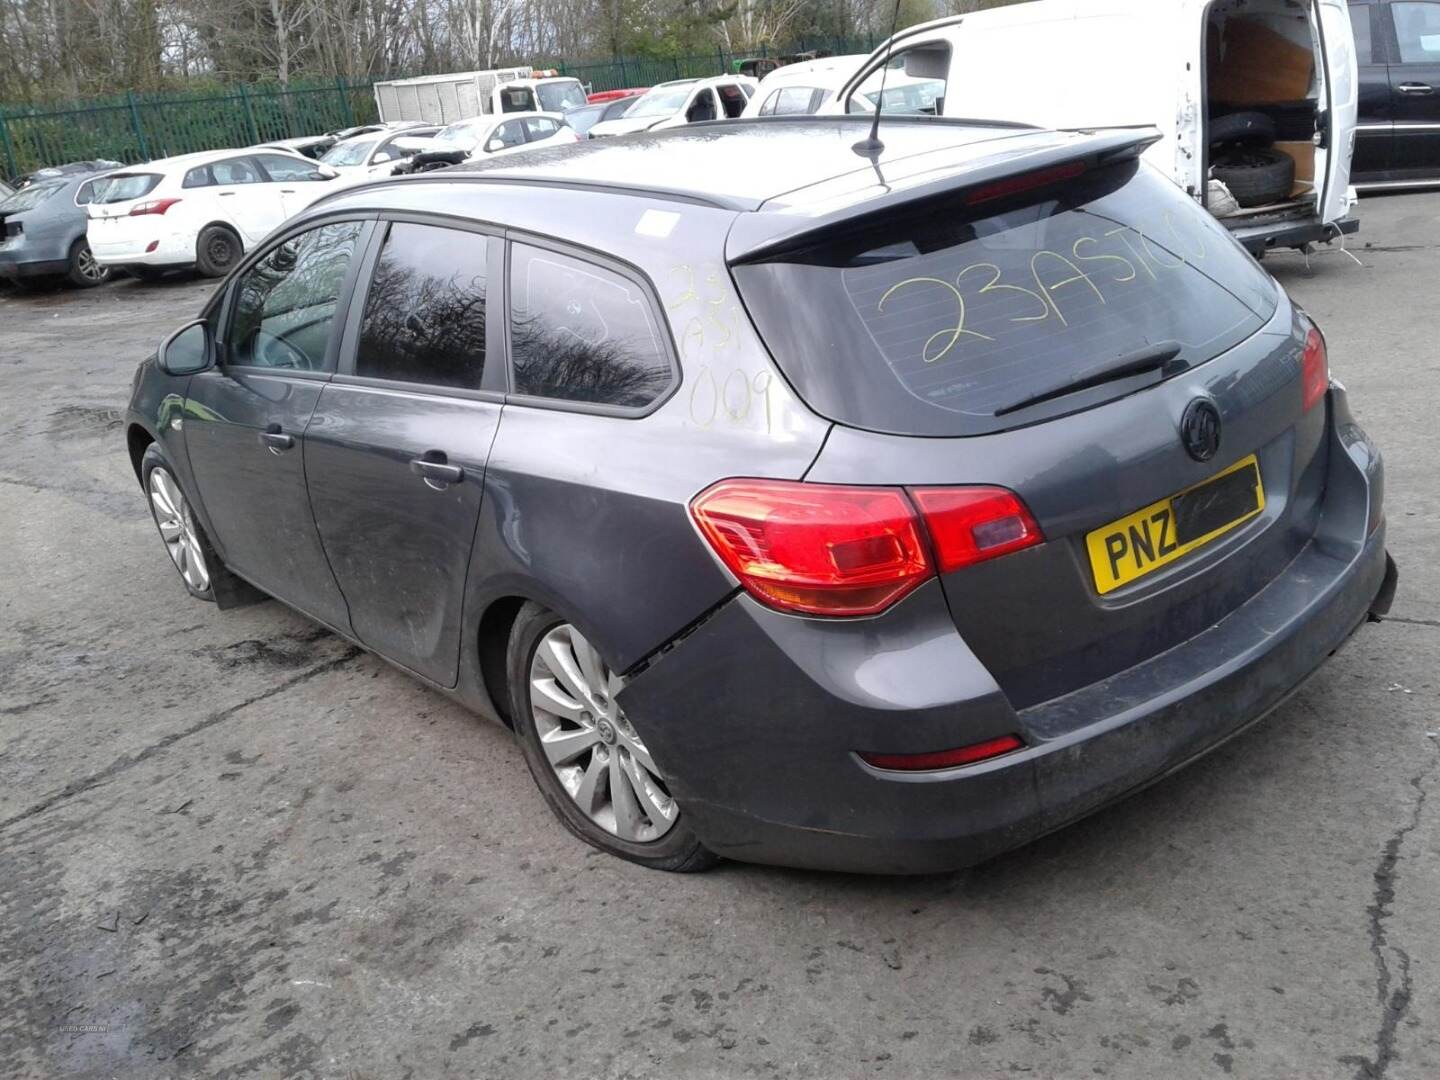 OPEL ASTRA SPORTS TOURER astra-j-sports-tourer-1-7cdti Used - the parking